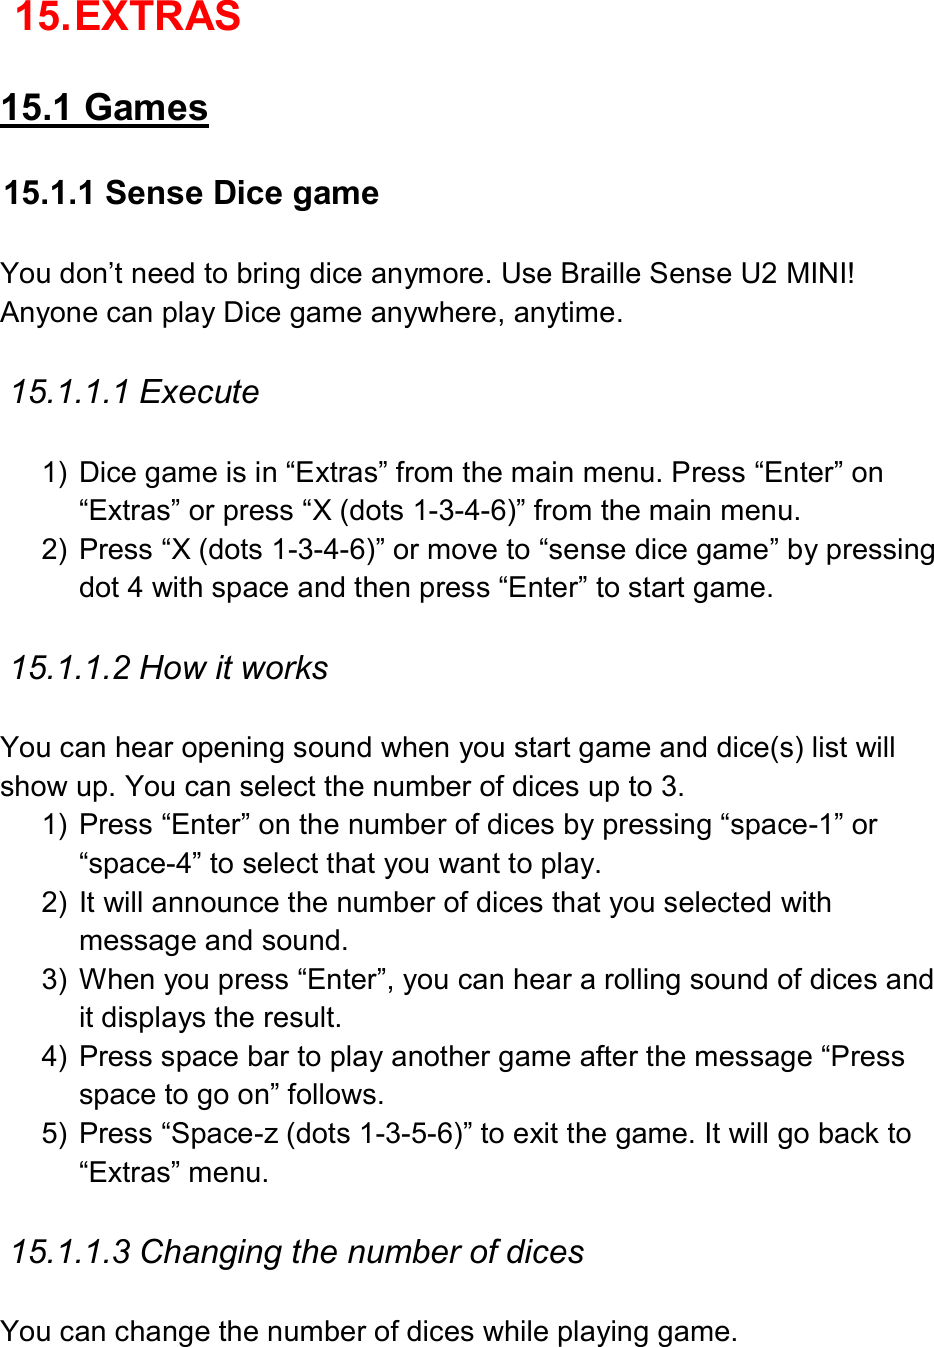  15. EXTRAS  15.1 Games  15.1.1 Sense Dice game  You don’t need to bring dice anymore. Use Braille Sense U2 MINI! Anyone can play Dice game anywhere, anytime.    15.1.1.1 Execute  1)  Dice game is in “Extras” from the main menu. Press “Enter” on “Extras” or press “X (dots 1-3-4-6)” from the main menu.   2)  Press “X (dots 1-3-4-6)” or move to “sense dice game” by pressing dot 4 with space and then press “Enter” to start game.  15.1.1.2 How it works  You can hear opening sound when you start game and dice(s) list will show up. You can select the number of dices up to 3. 1)  Press “Enter” on the number of dices by pressing “space-1” or “space-4” to select that you want to play. 2)  It will announce the number of dices that you selected with message and sound.   3)  When you press “Enter”, you can hear a rolling sound of dices and it displays the result. 4)  Press space bar to play another game after the message “Press space to go on” follows.   5)  Press “Space-z (dots 1-3-5-6)” to exit the game. It will go back to “Extras” menu.    15.1.1.3 Changing the number of dices  You can change the number of dices while playing game.   